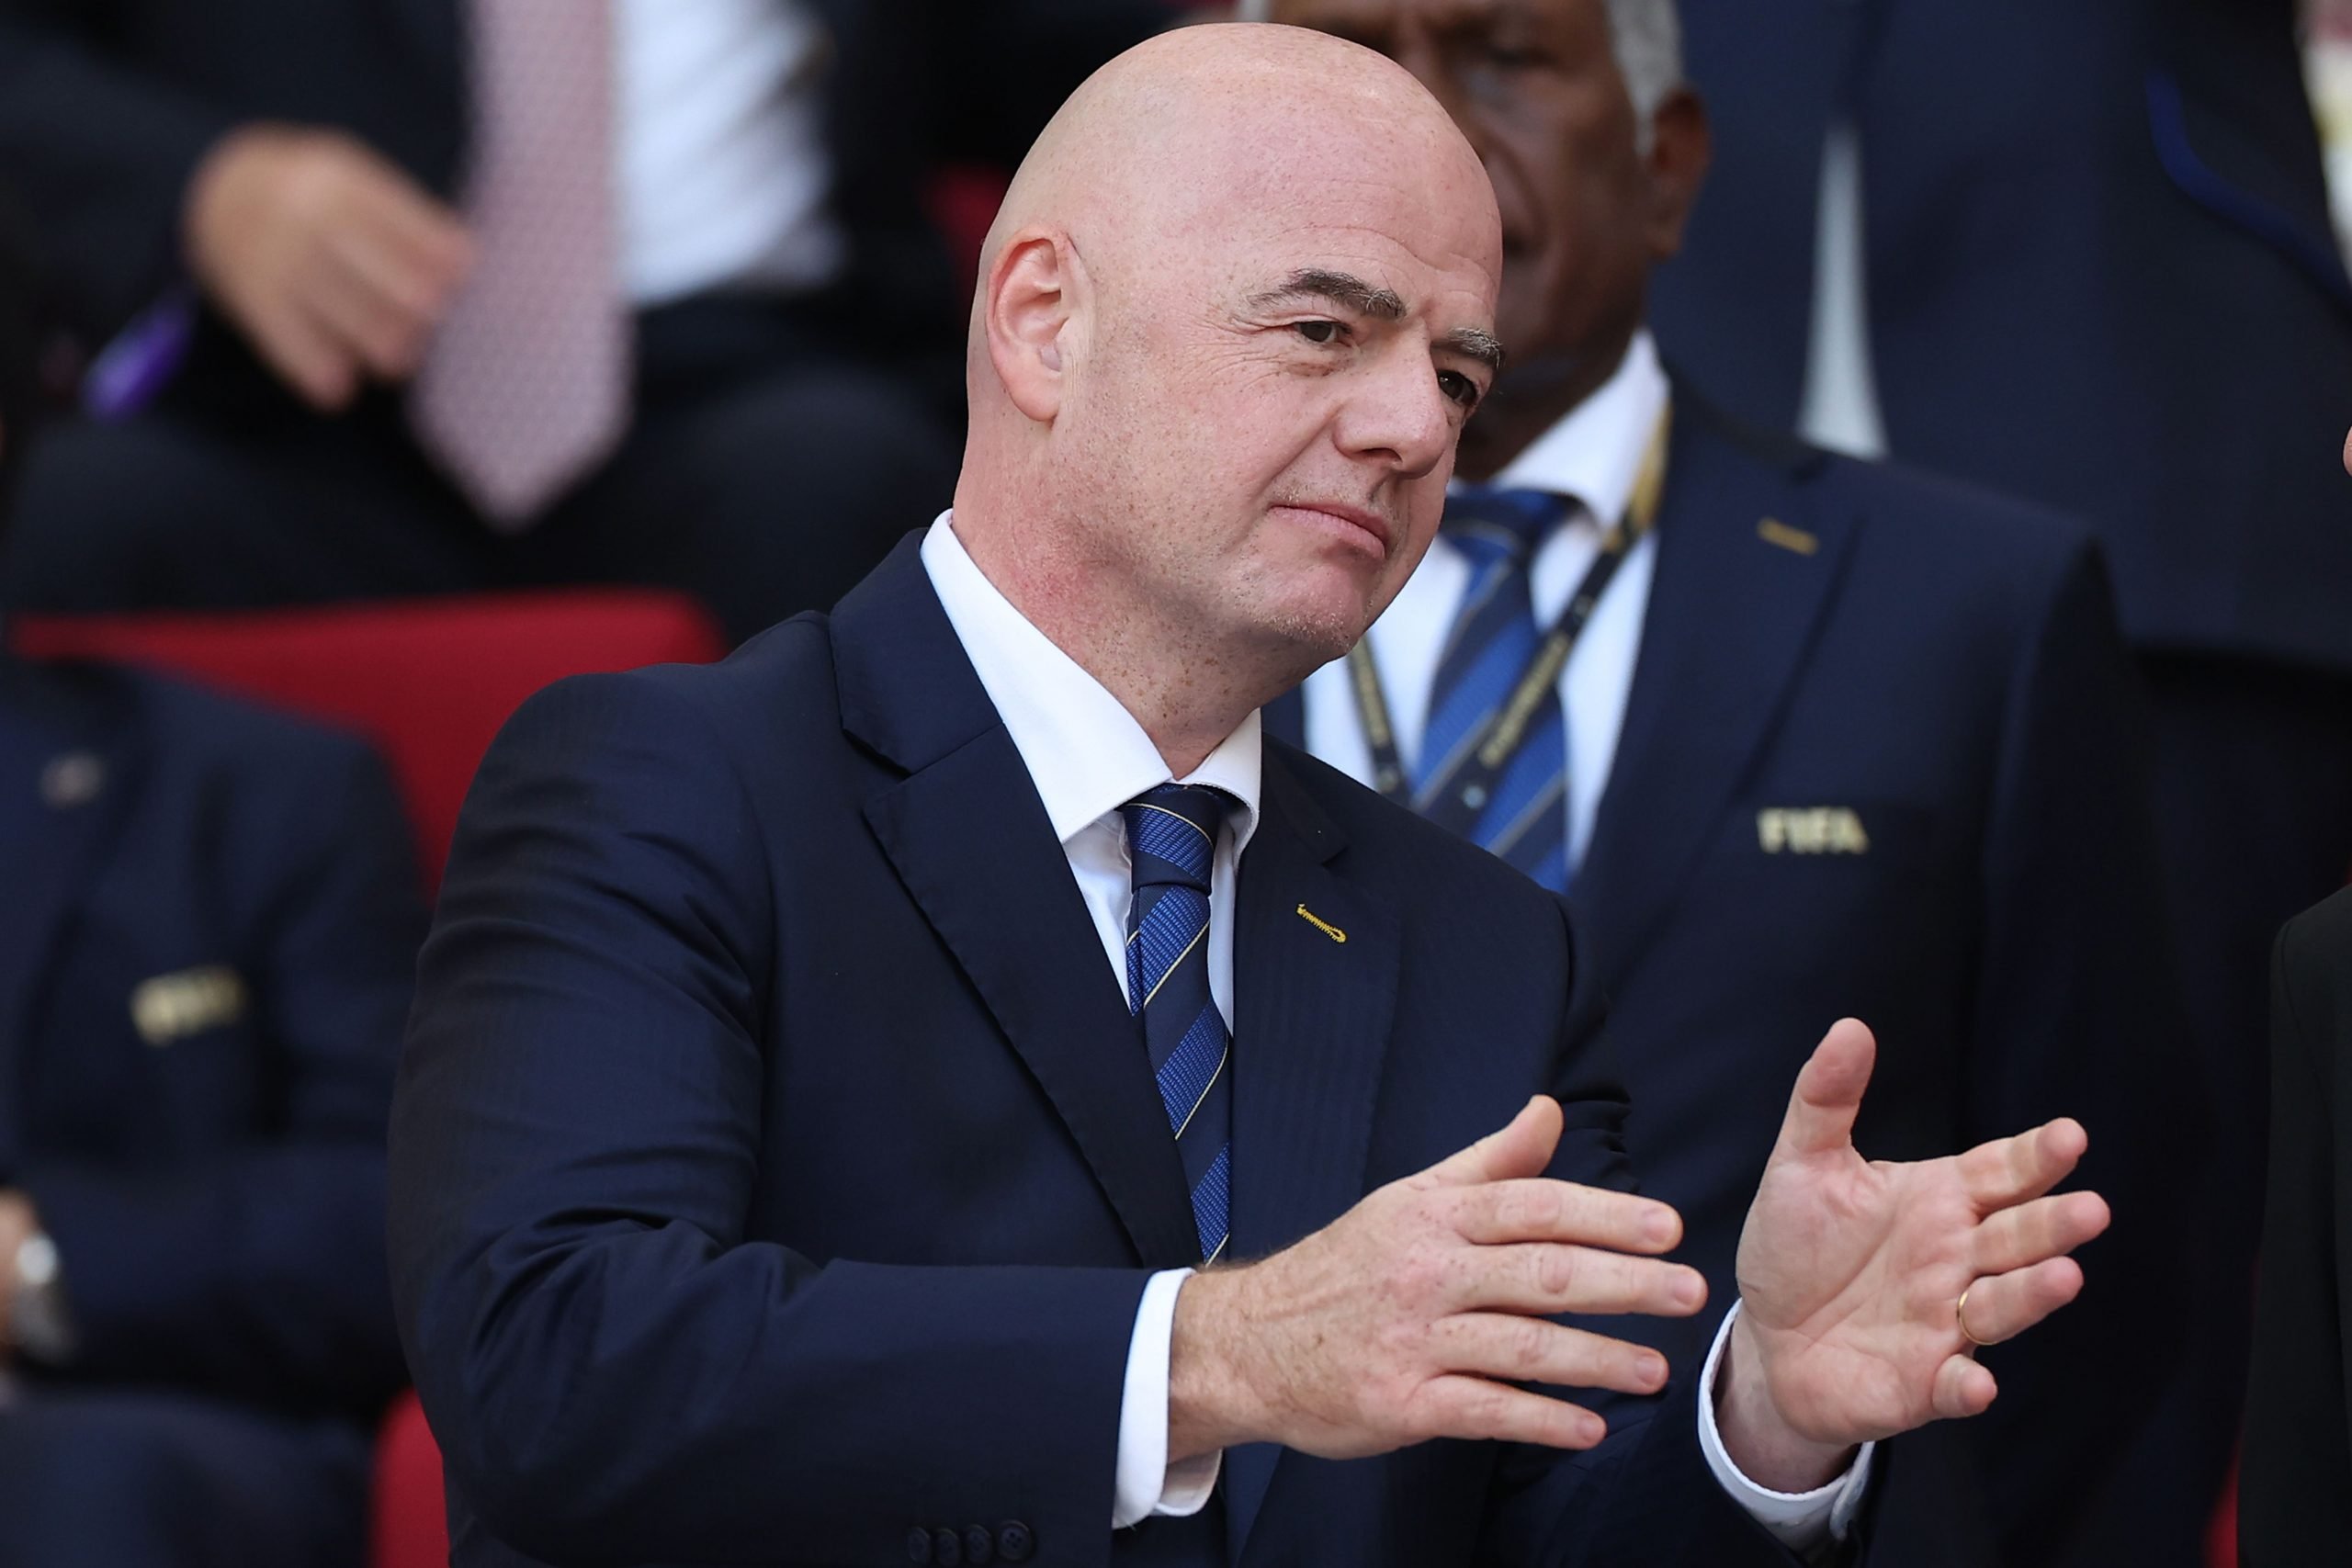 FIFA President: FIFA World Cup Qatar 2022 Group Stage "Best Ever"